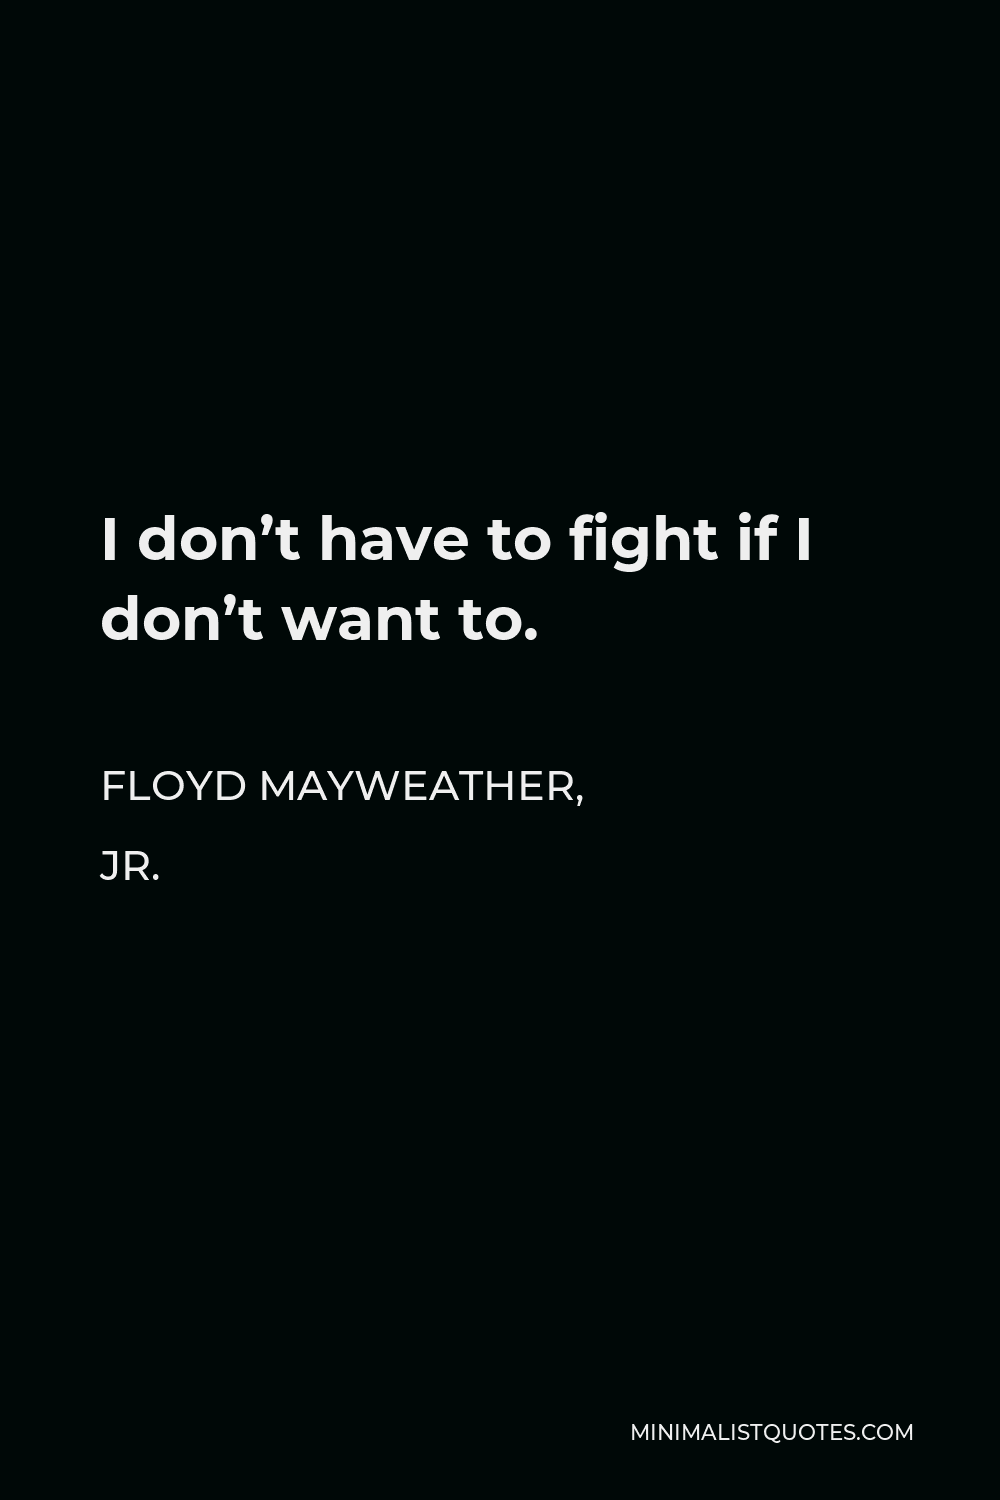 Floyd Mayweather, Jr. Quote - I don’t have to fight if I don’t want to.